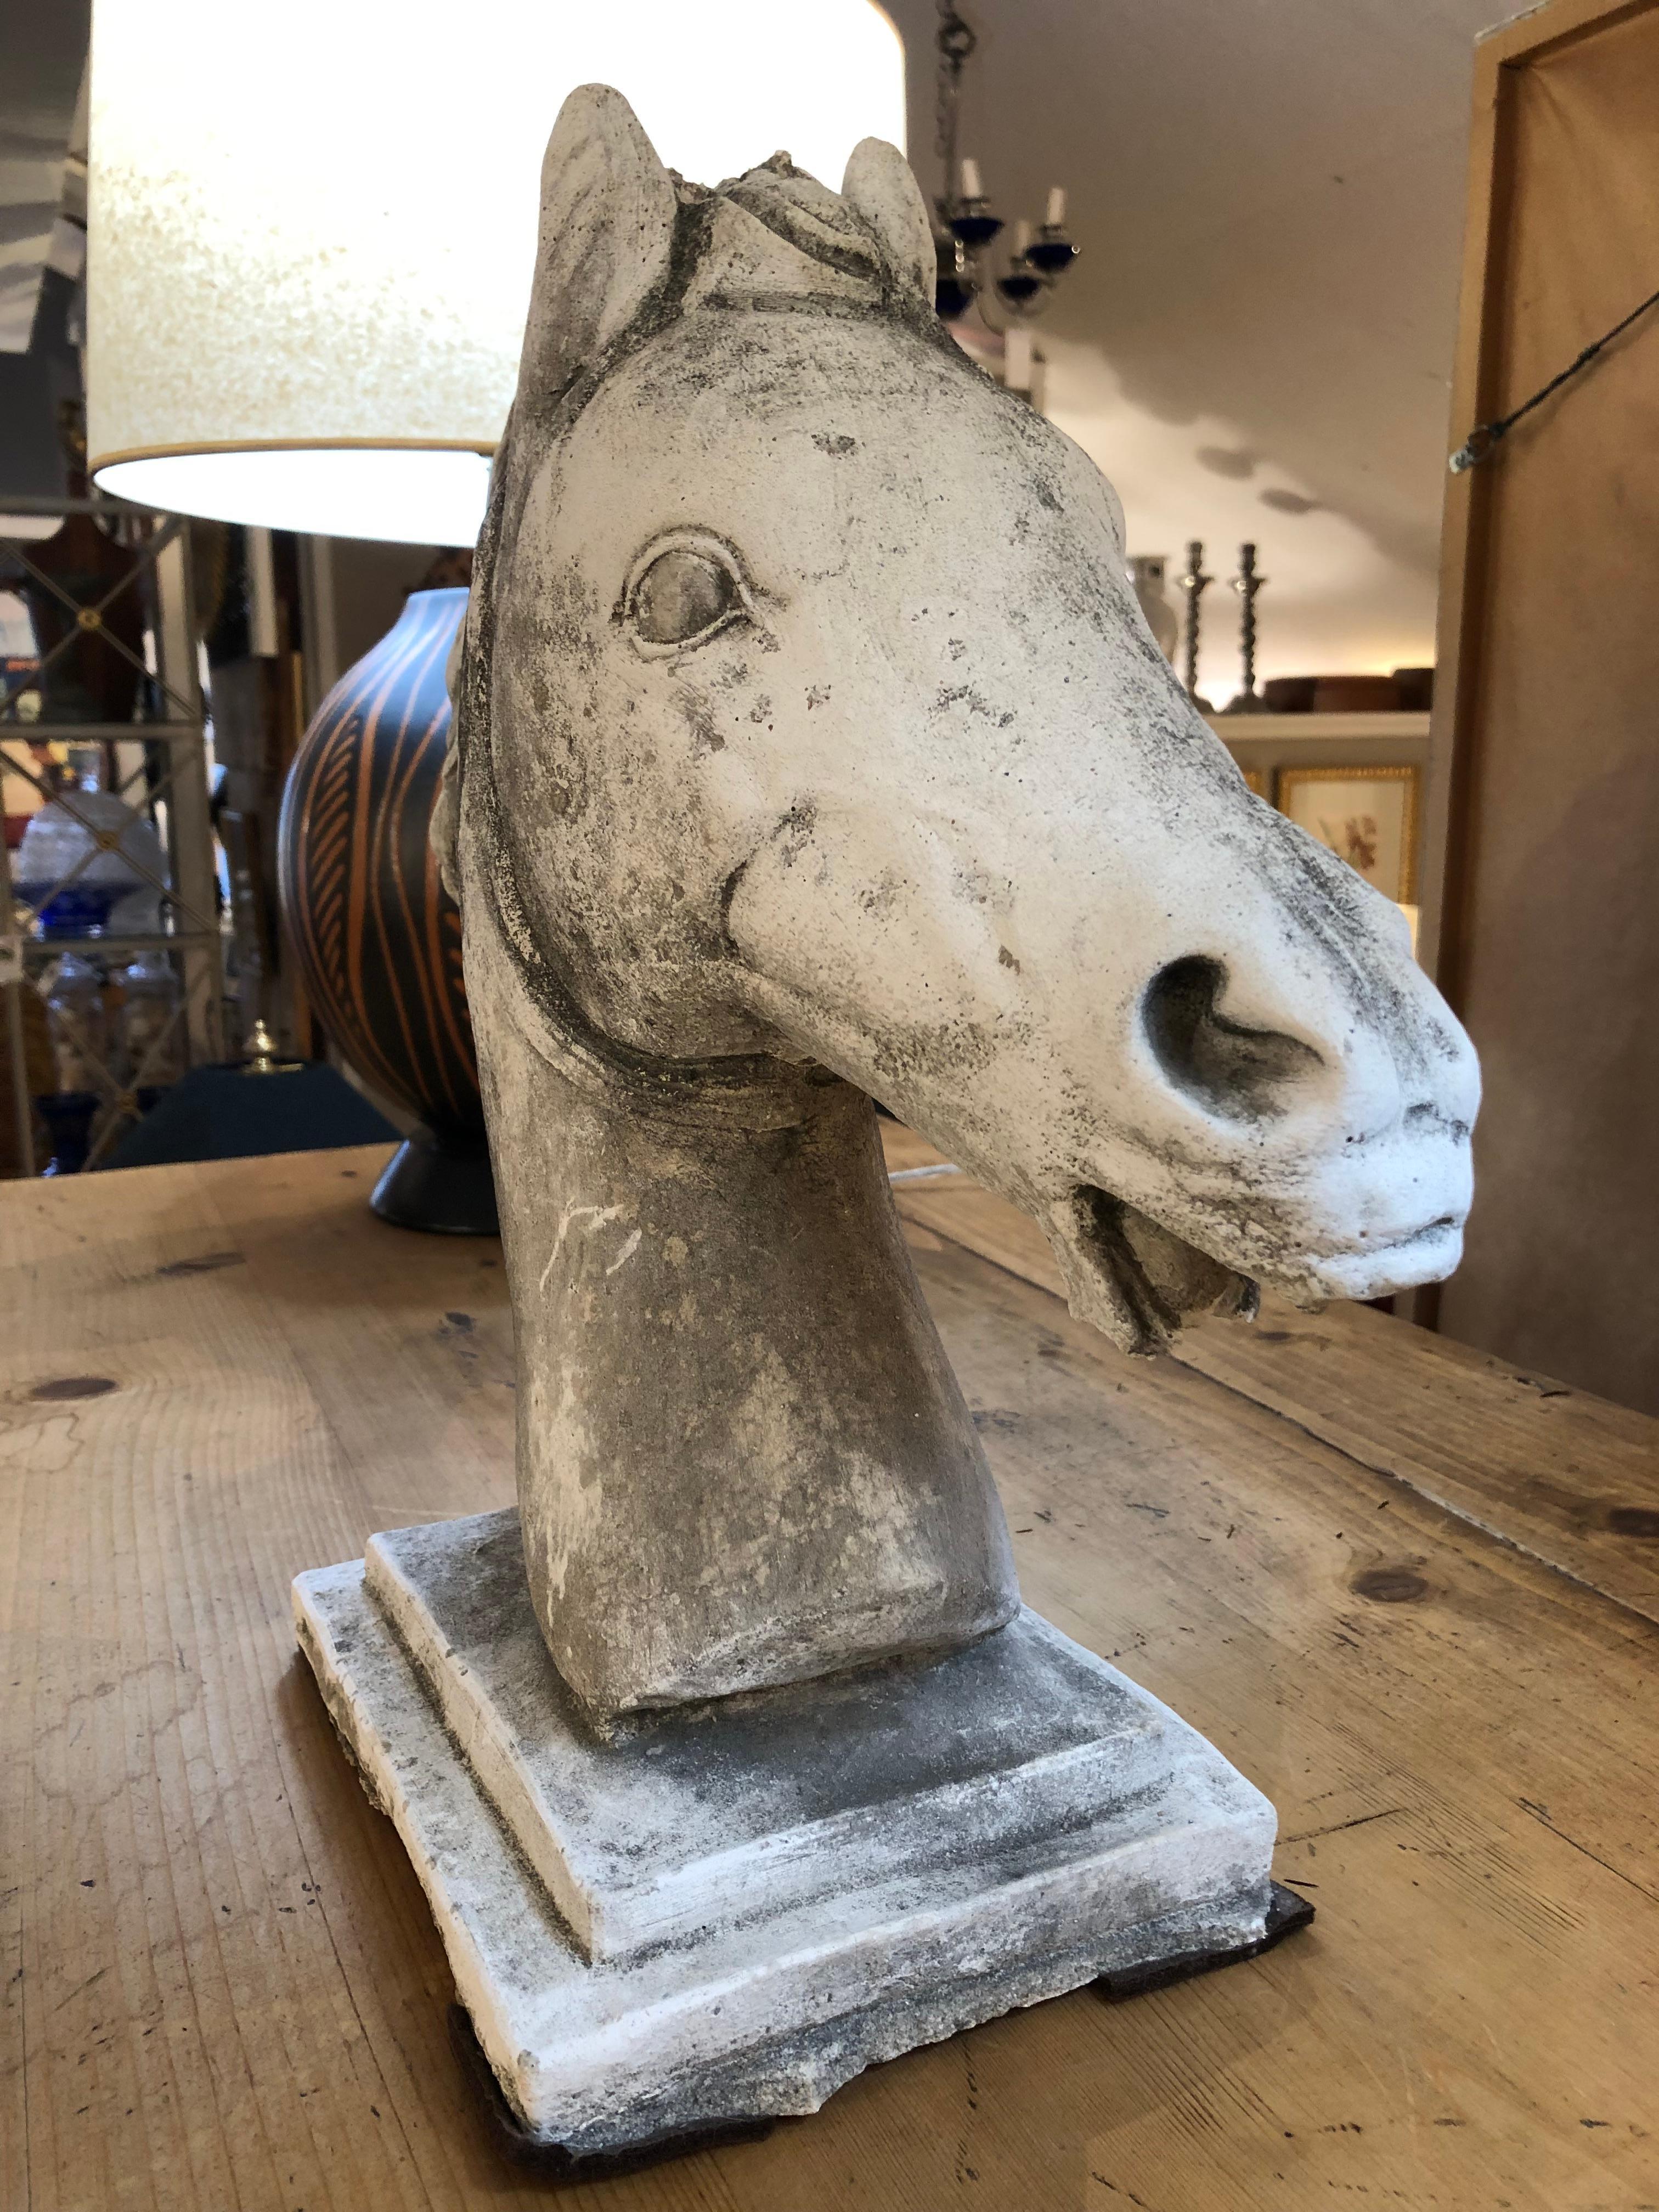 Striking grey cement carved sculpture of a handsome horse head.  Dramatic piece of art and design accessory.  Can be displayed inside or outdoors.